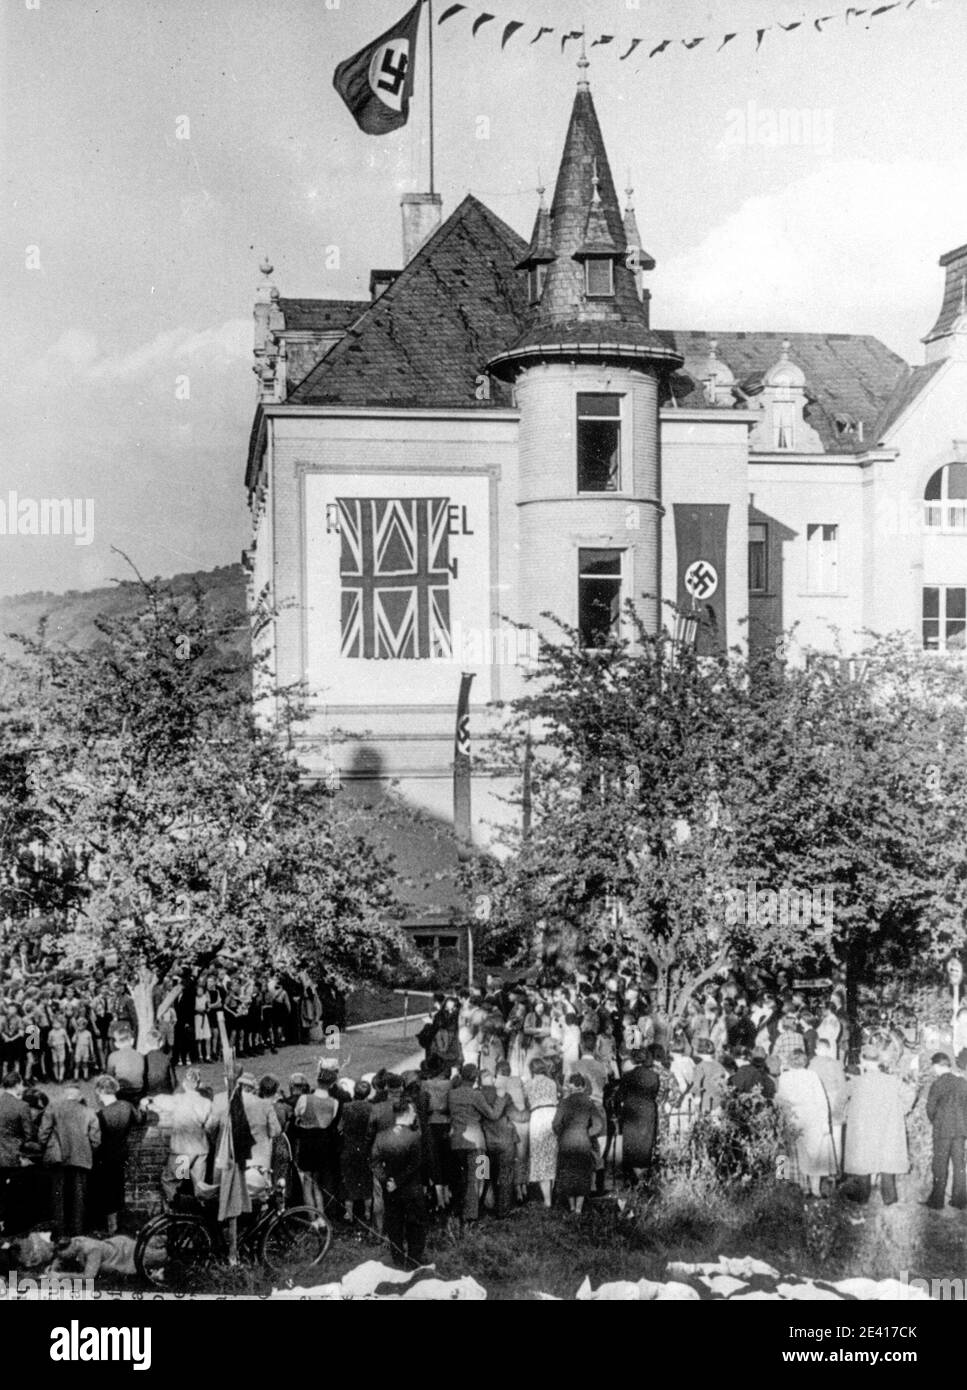 The Dreeson Hotel in Bad Godesberg is festooned with British and Nazi flags in preparation for the meeting between Neville Chamberlain, the British Prime Minster, and Adolf Hitler in relation to Hitler's demands on Czecoslovakia. Hitler wished to annexe Sudetenland from Czechoslovakia. Stock Photo